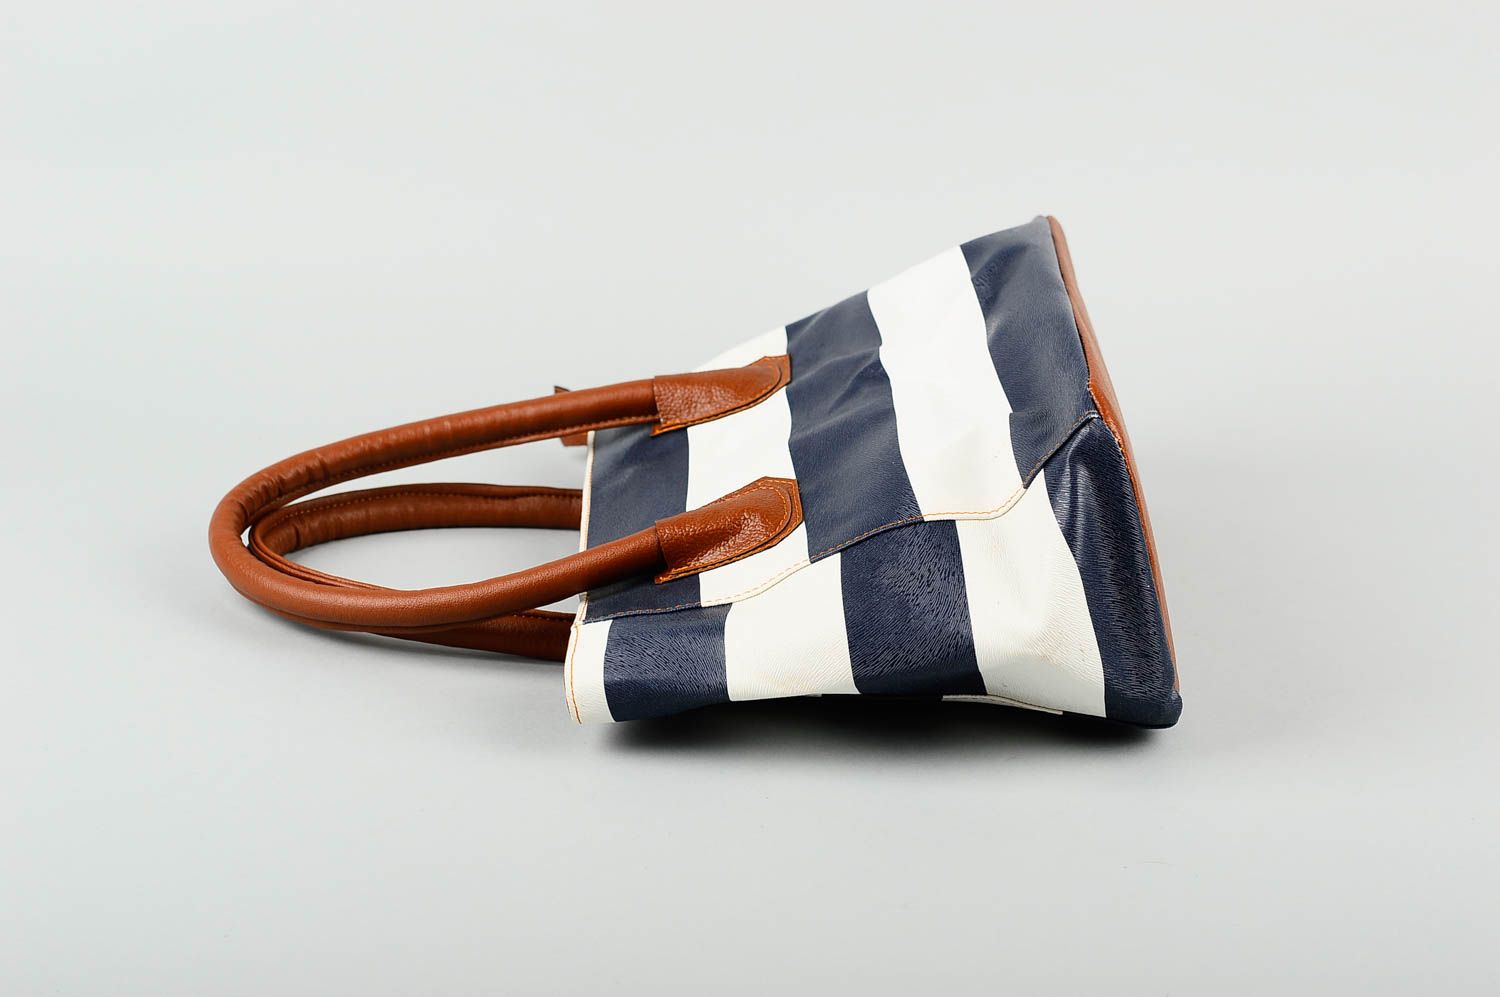 Striped handmade leather bag fashion trends luxury bags for girls gifts for her photo 3